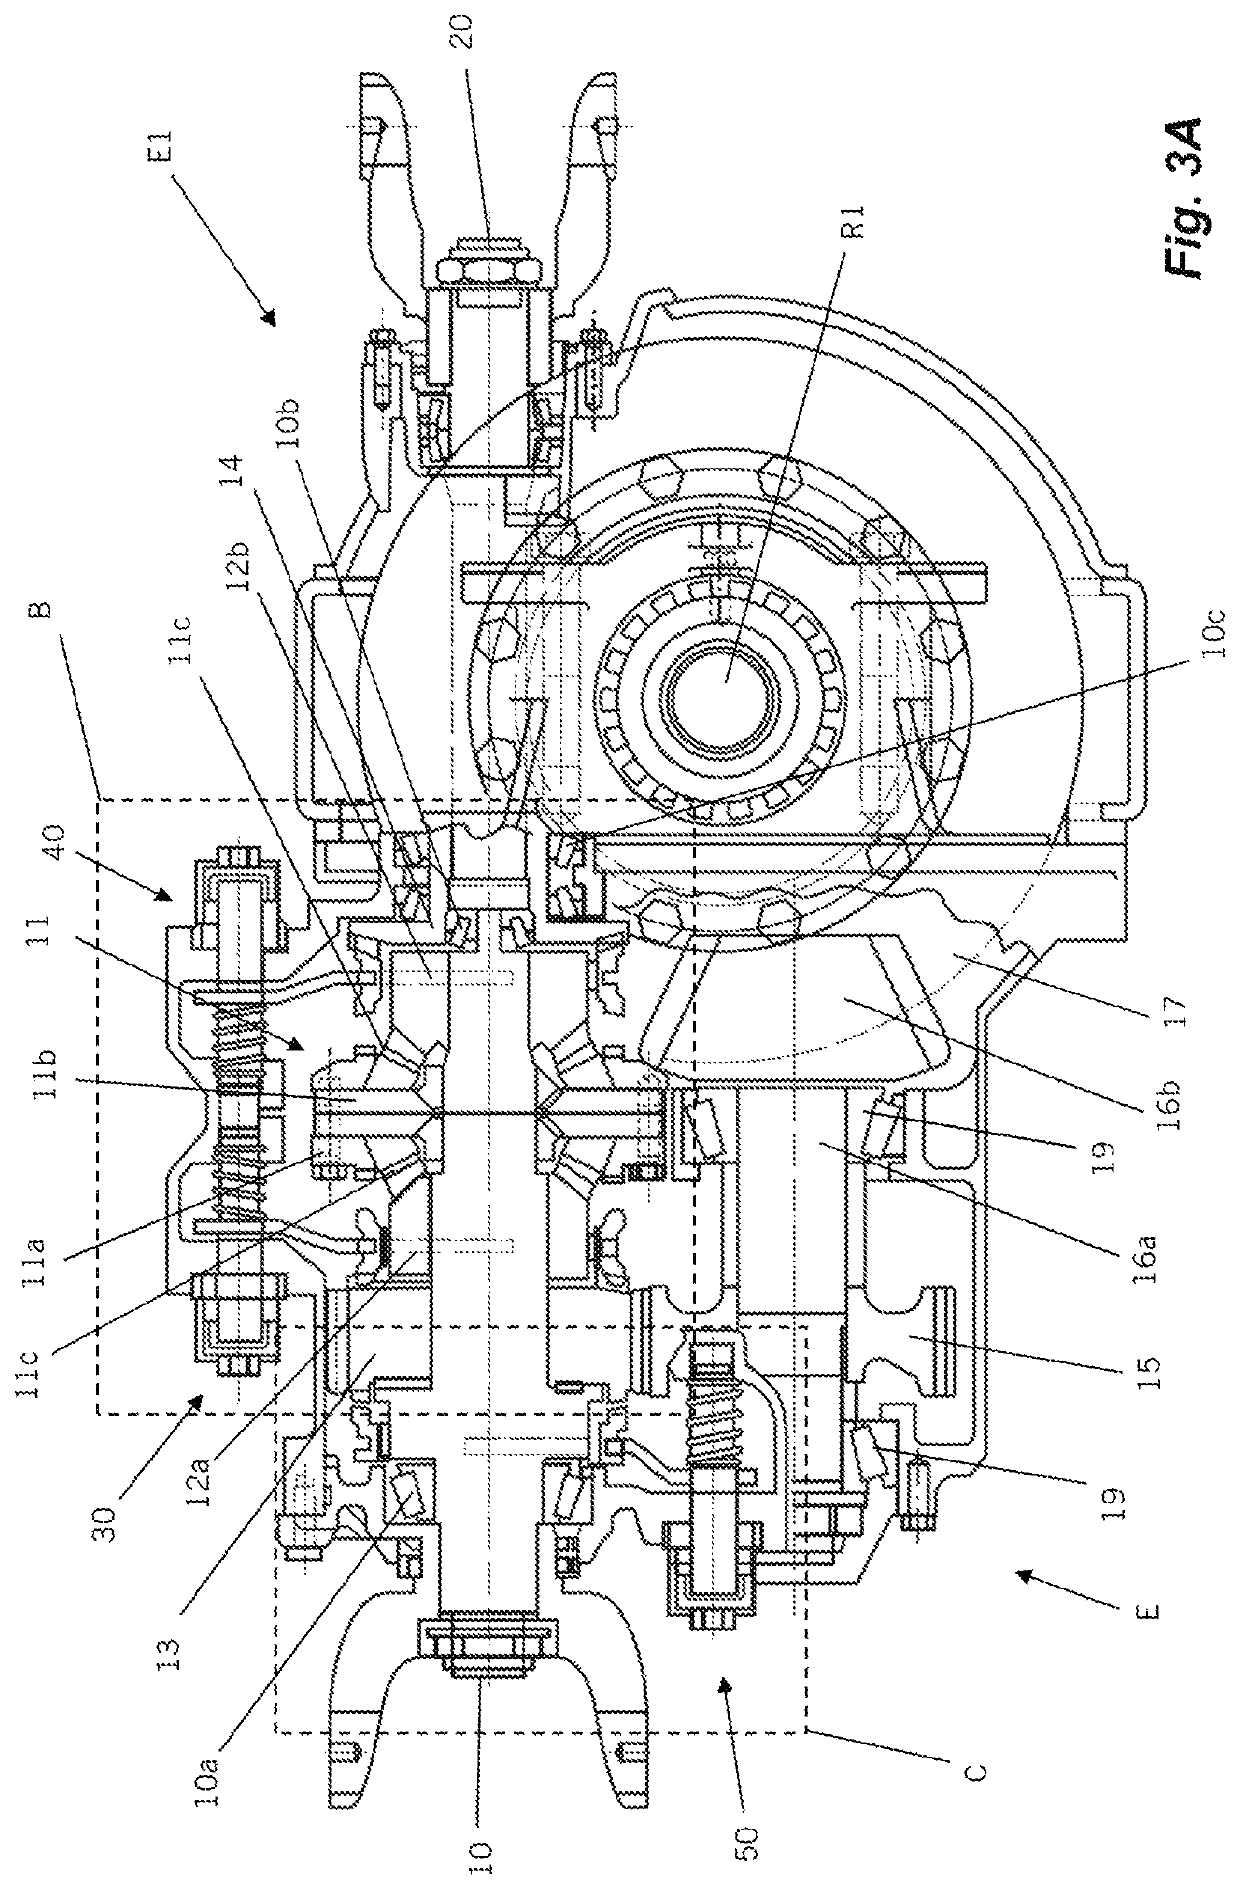 Power transmission assembly for tandem axles